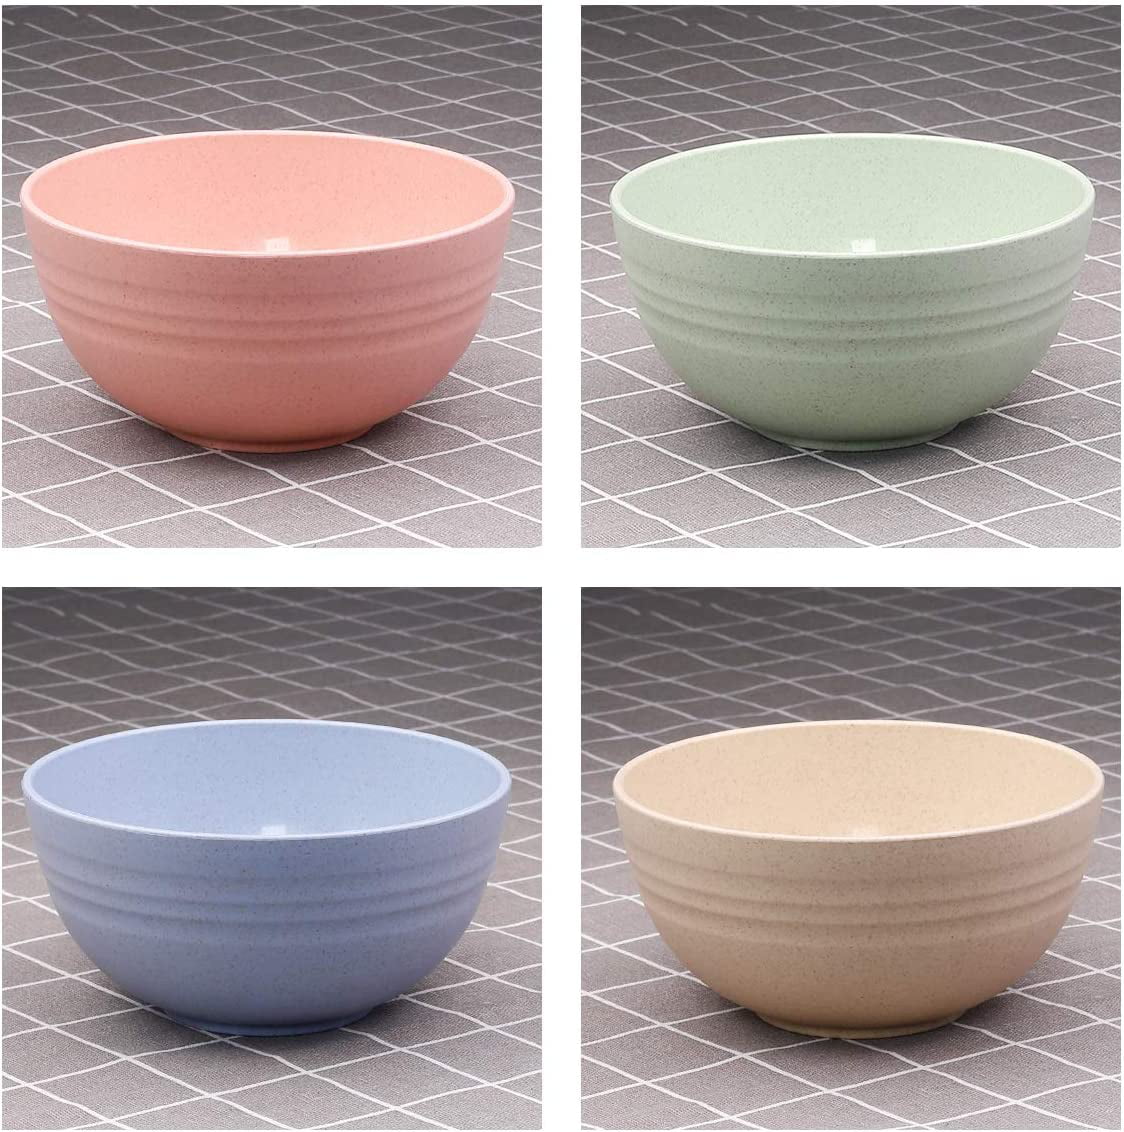 RosewineC Large Unbreakable Cereal Bowls,4 Sets 24 OZ Wheat Straw Fiber Lightweight Bowl,Dishwasher & Microwave Safe for Adults,Rice,Soup Bowls 